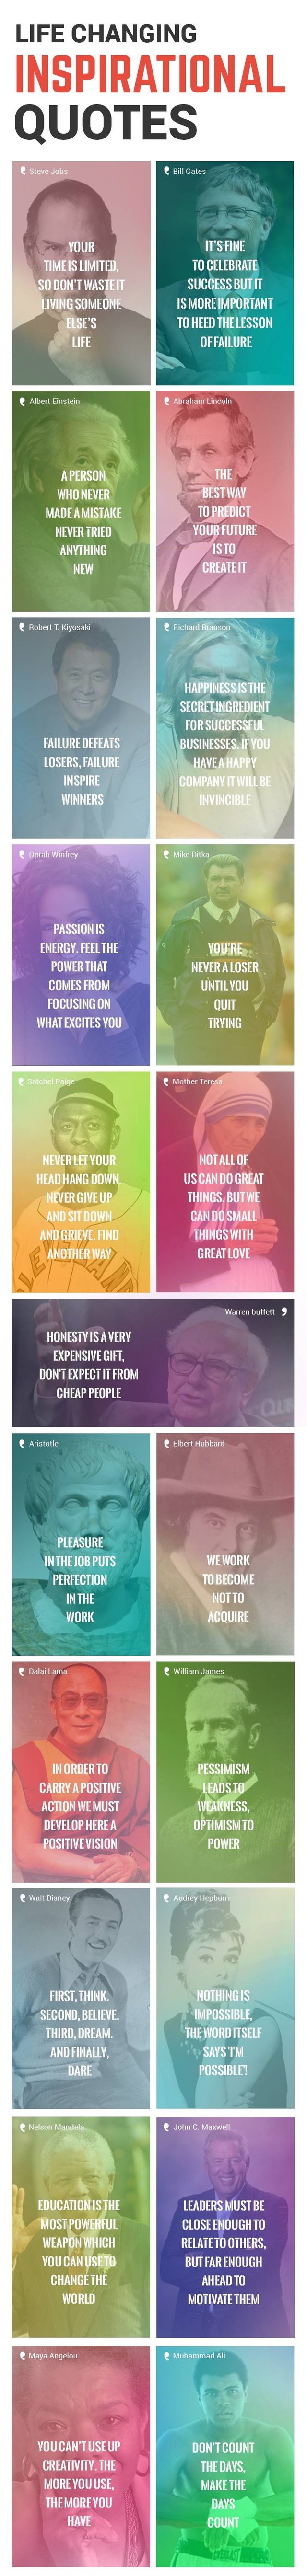 best-inspirational-quotes-infographic.jpg